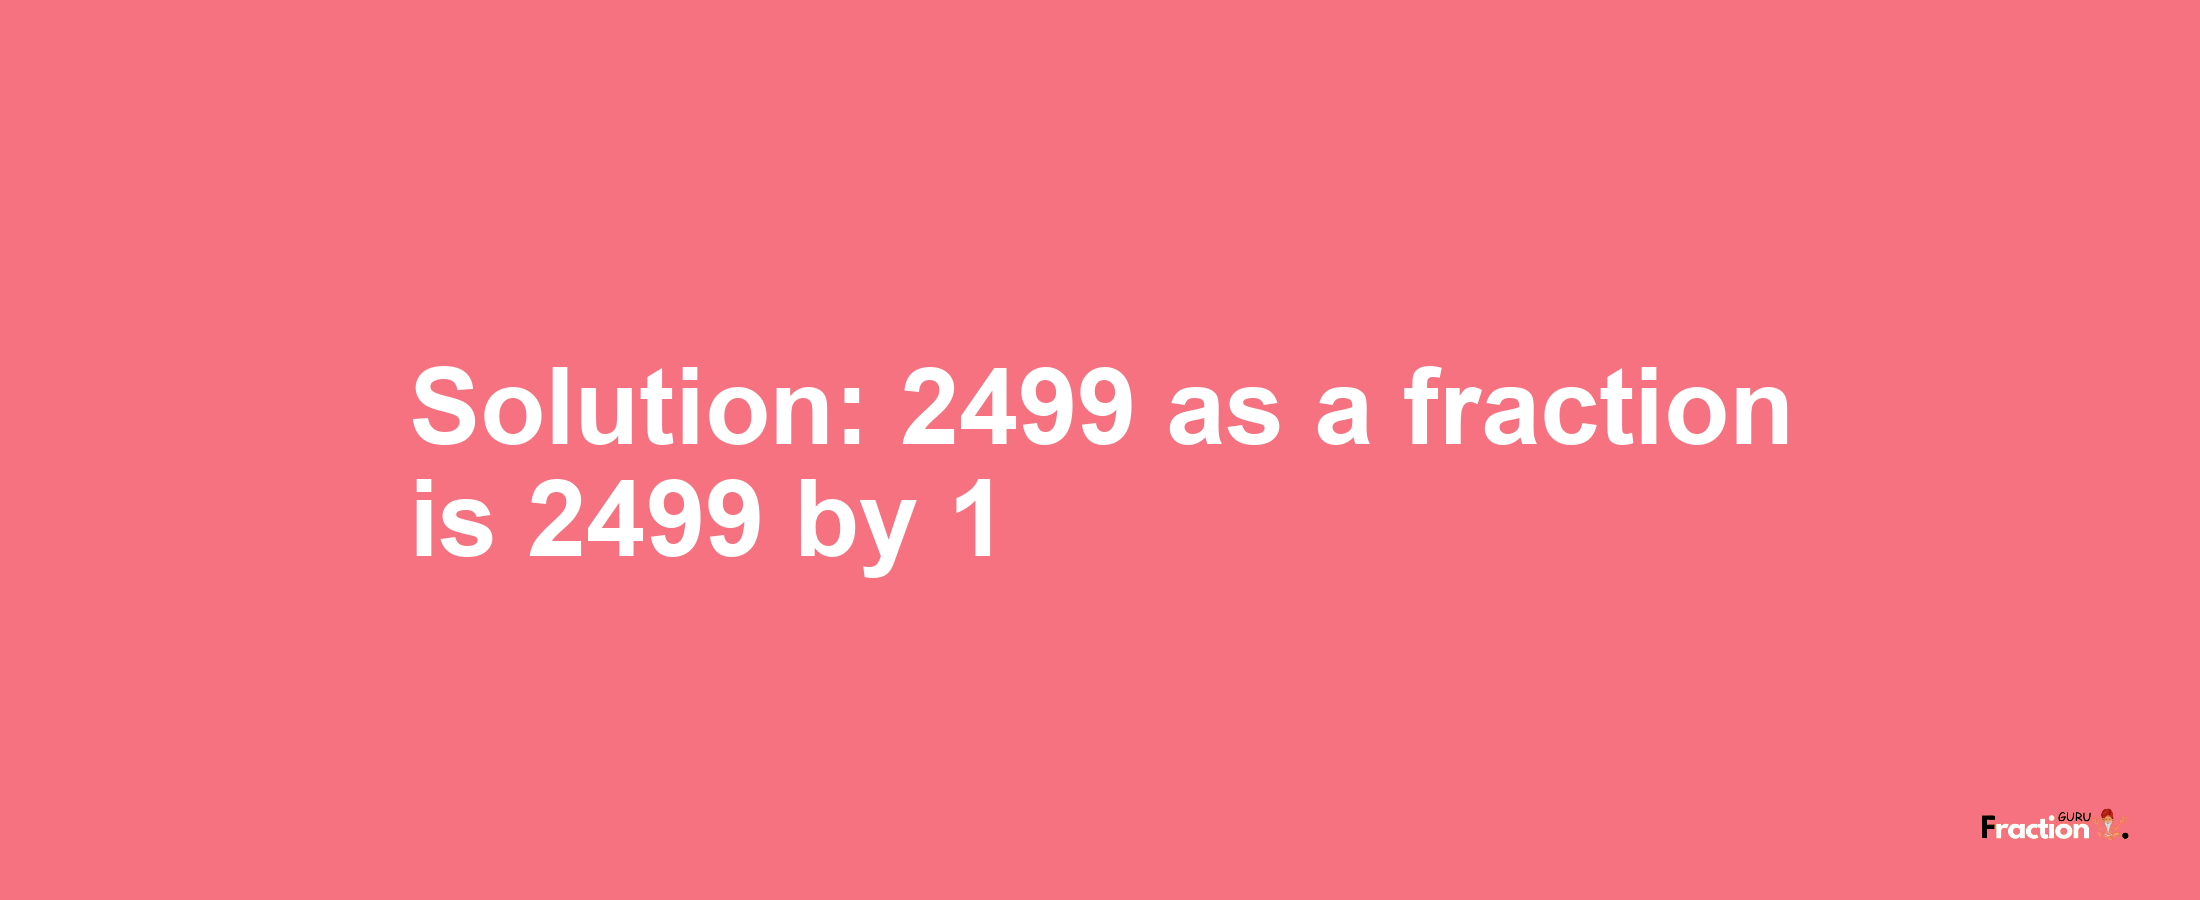 Solution:2499 as a fraction is 2499/1